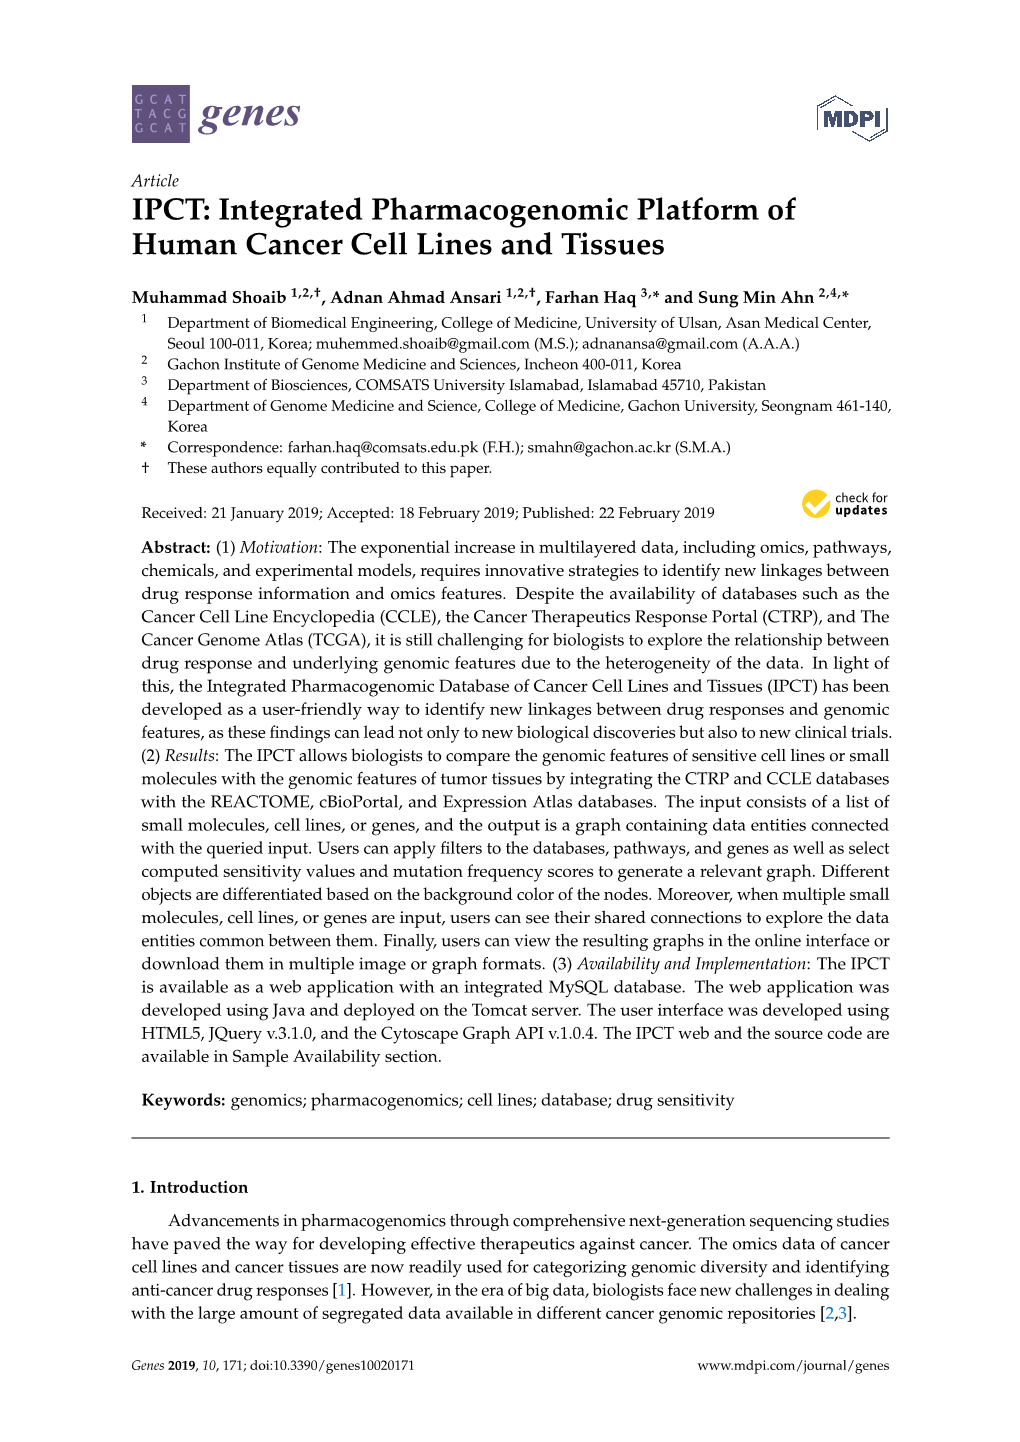 Integrated Pharmacogenomic Platform of Human Cancer Cell Lines and Tissues